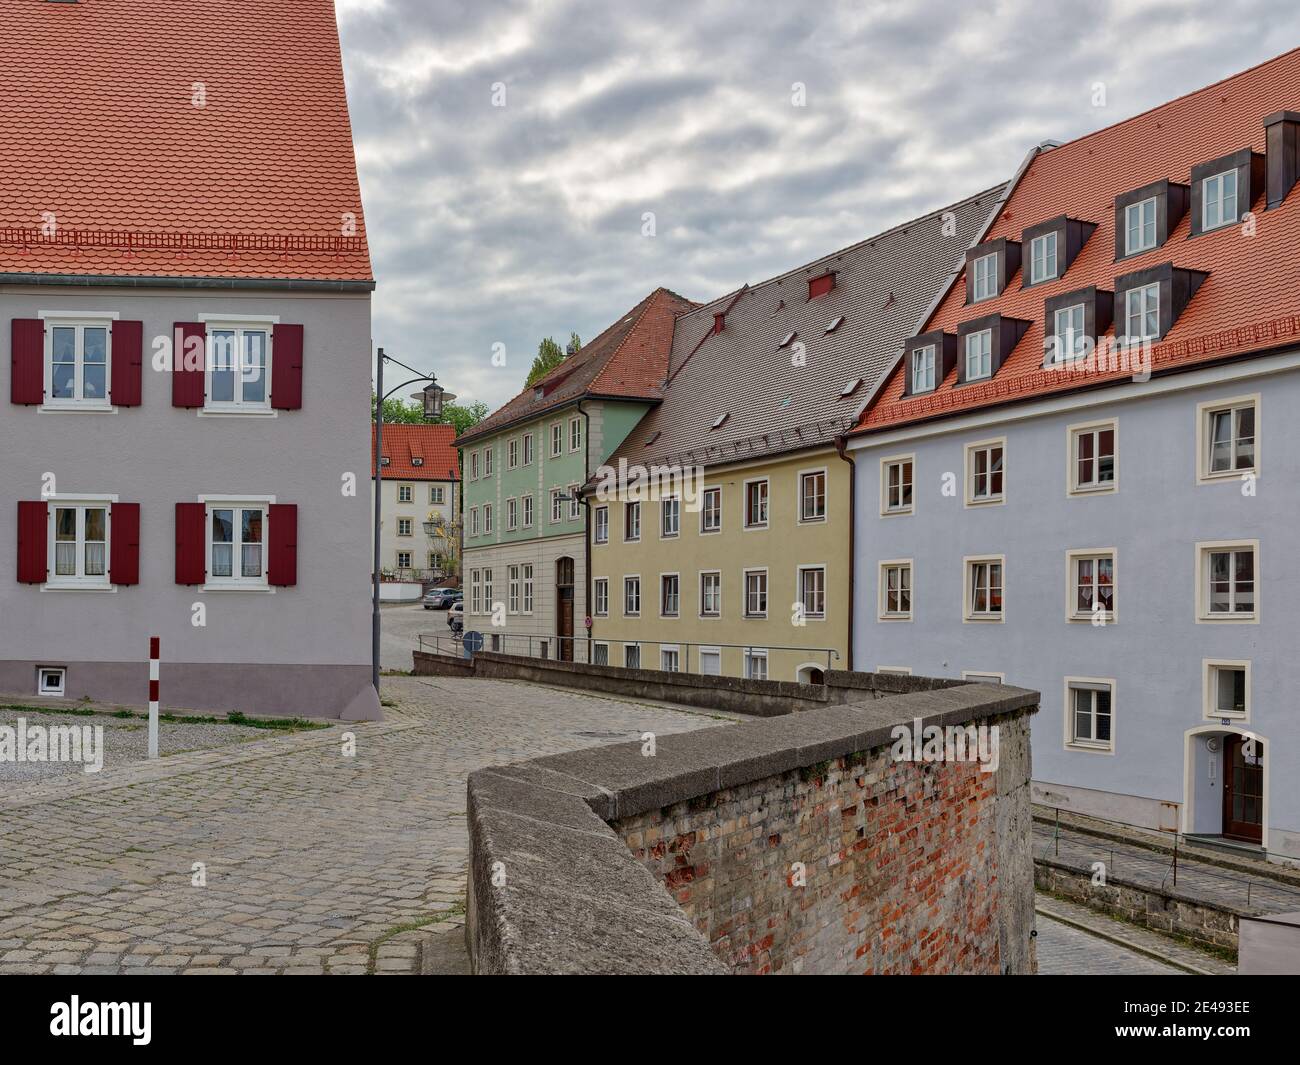 Square, cobblestone pavement, spring morning, old town, monument, place of interest, historic building, historic old town, monument protection, alley, street Stock Photo